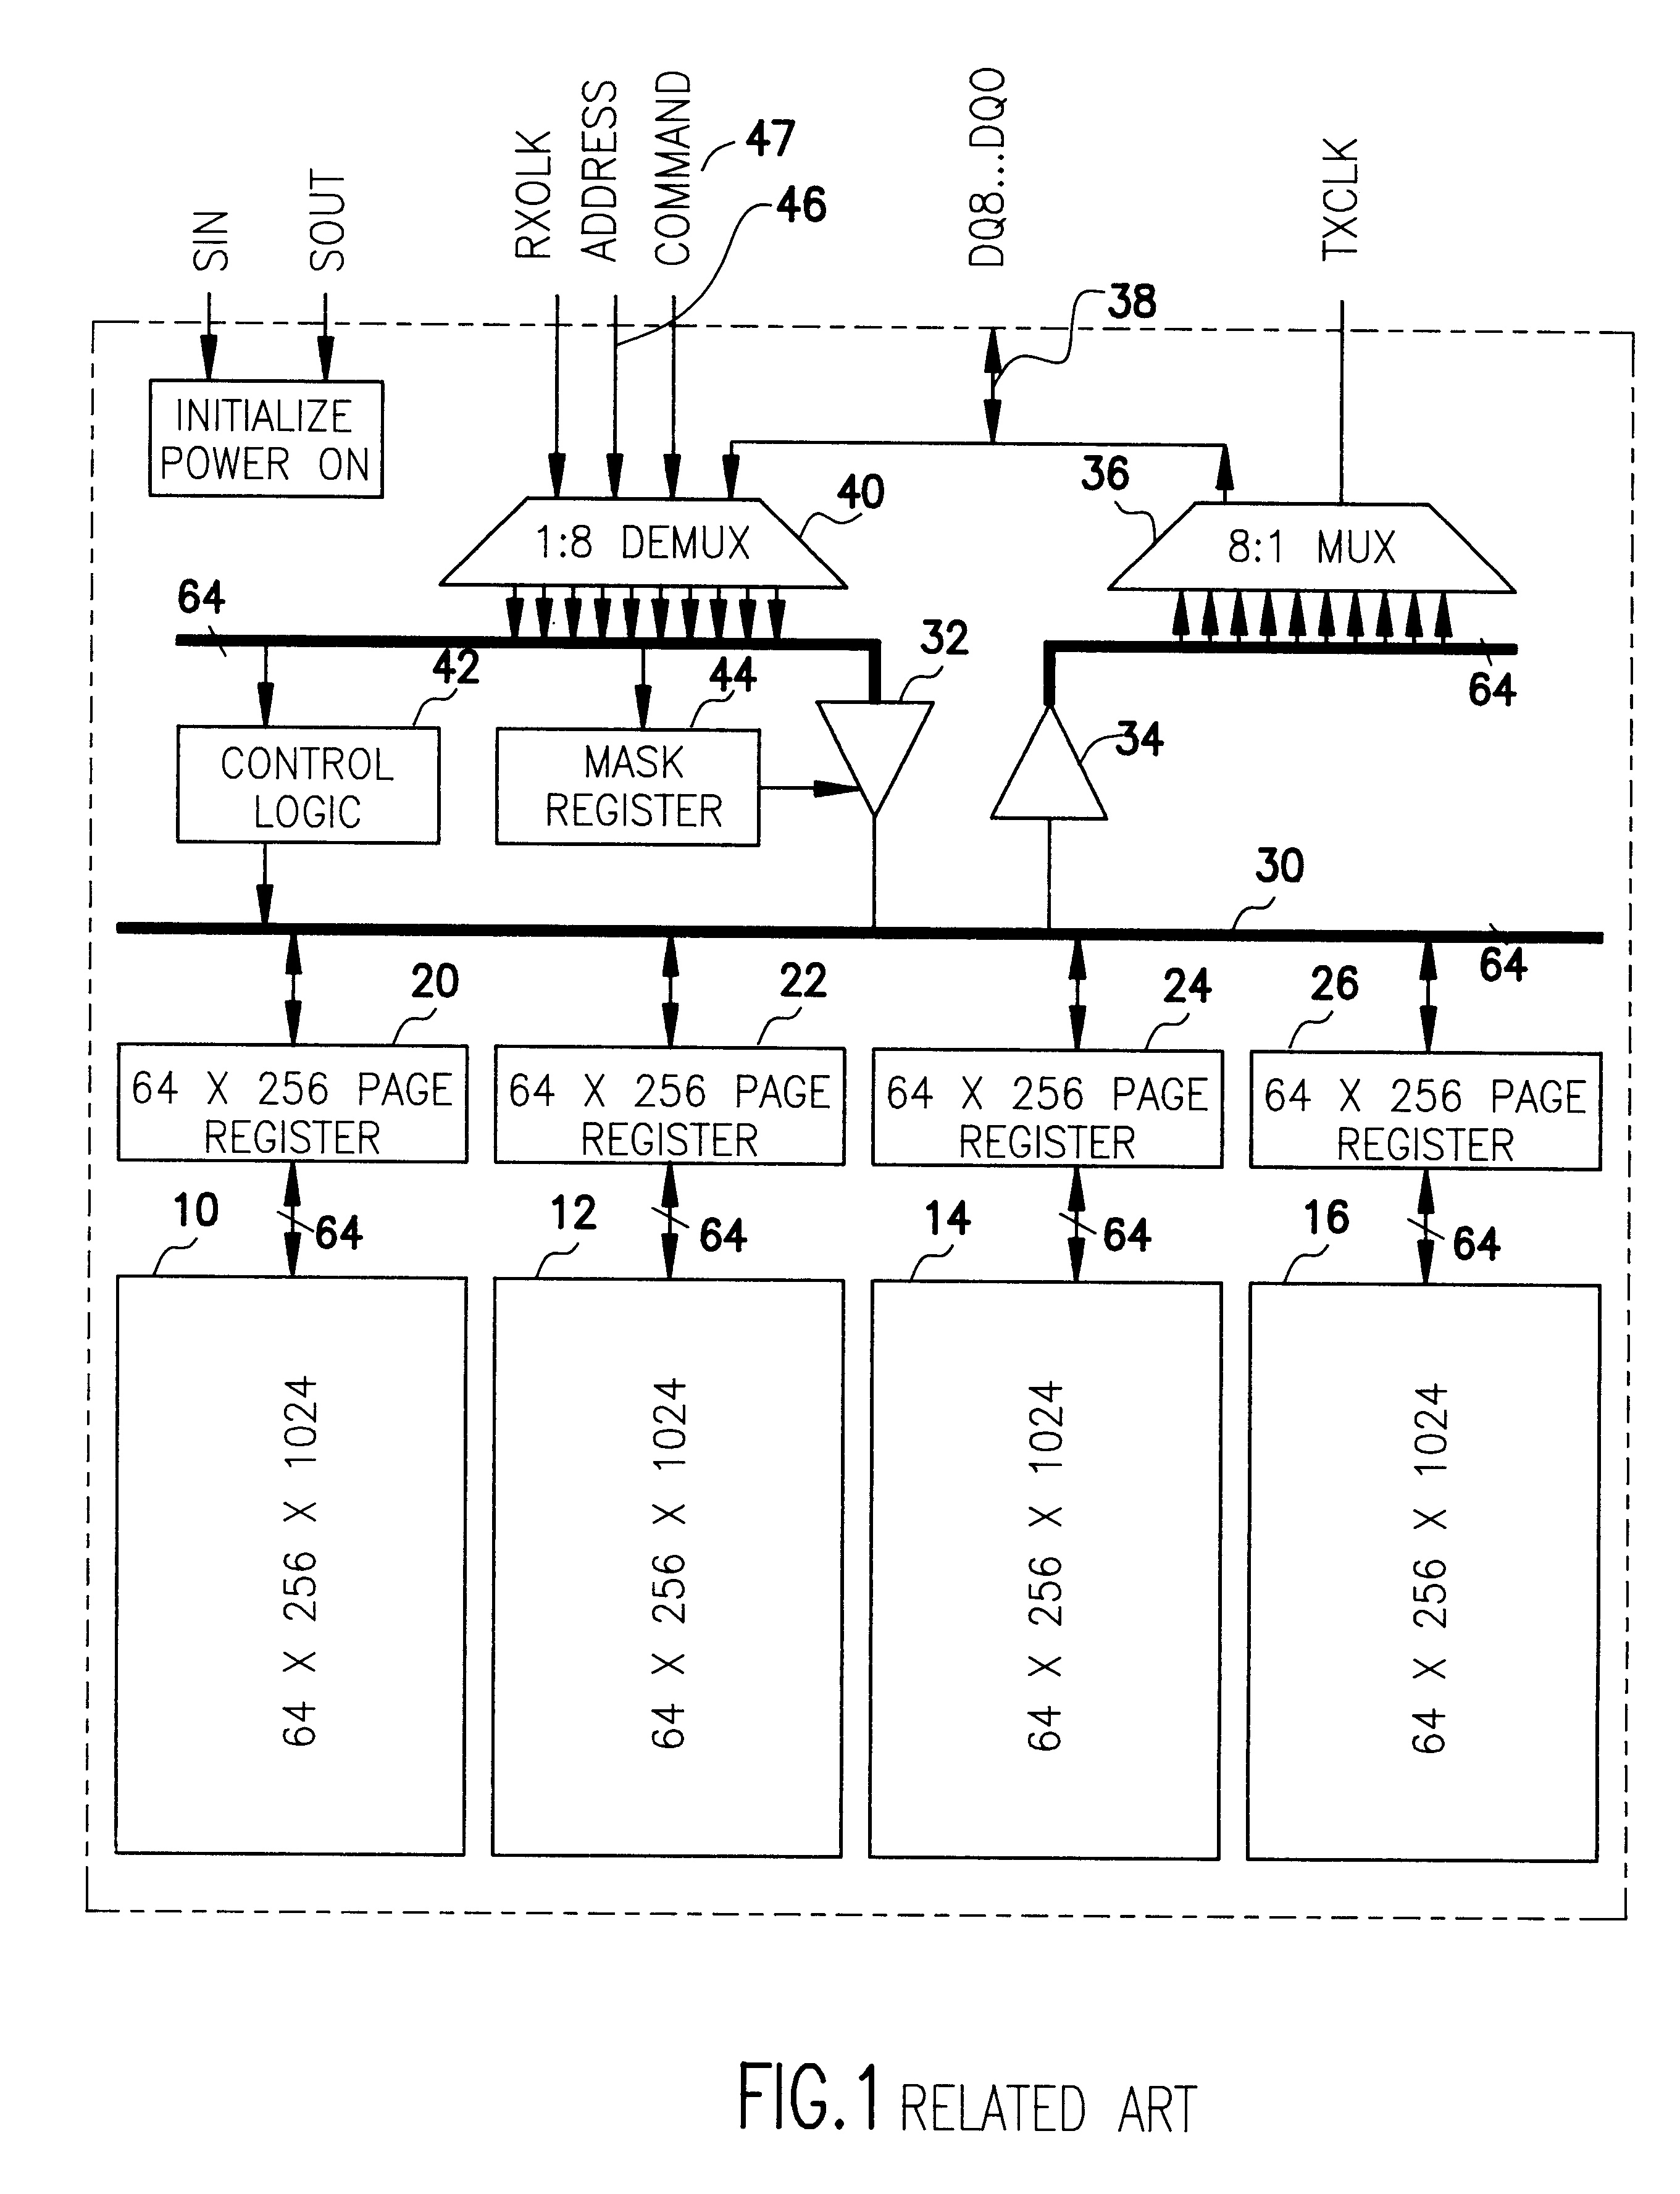 High bandwidth DRAM with low operating power modes